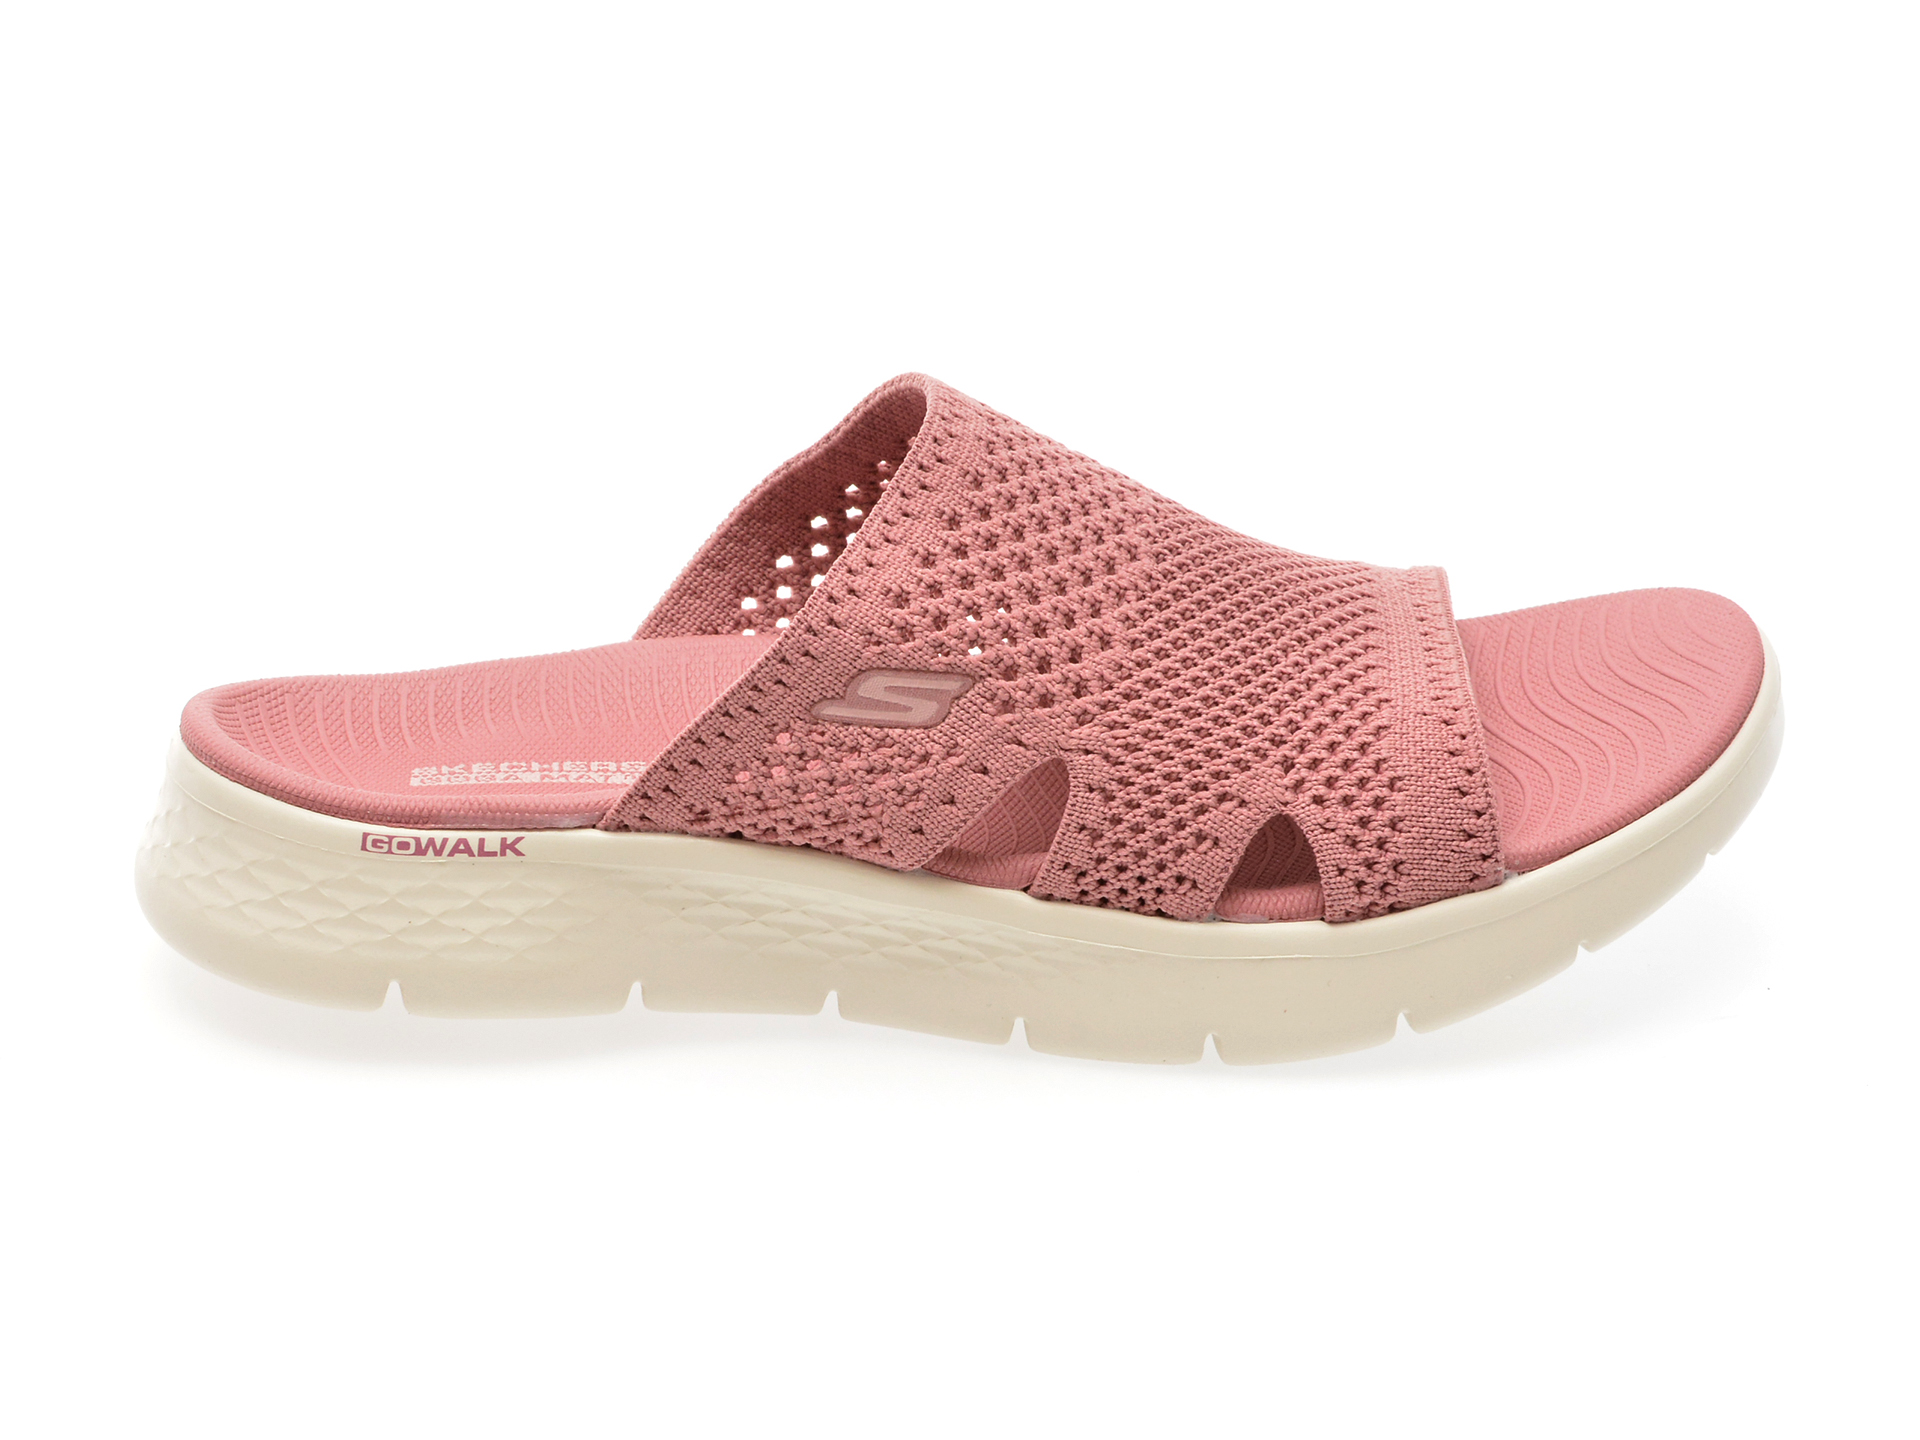 Papuci Casual Skechers Mov, 141425, Din Material Textil